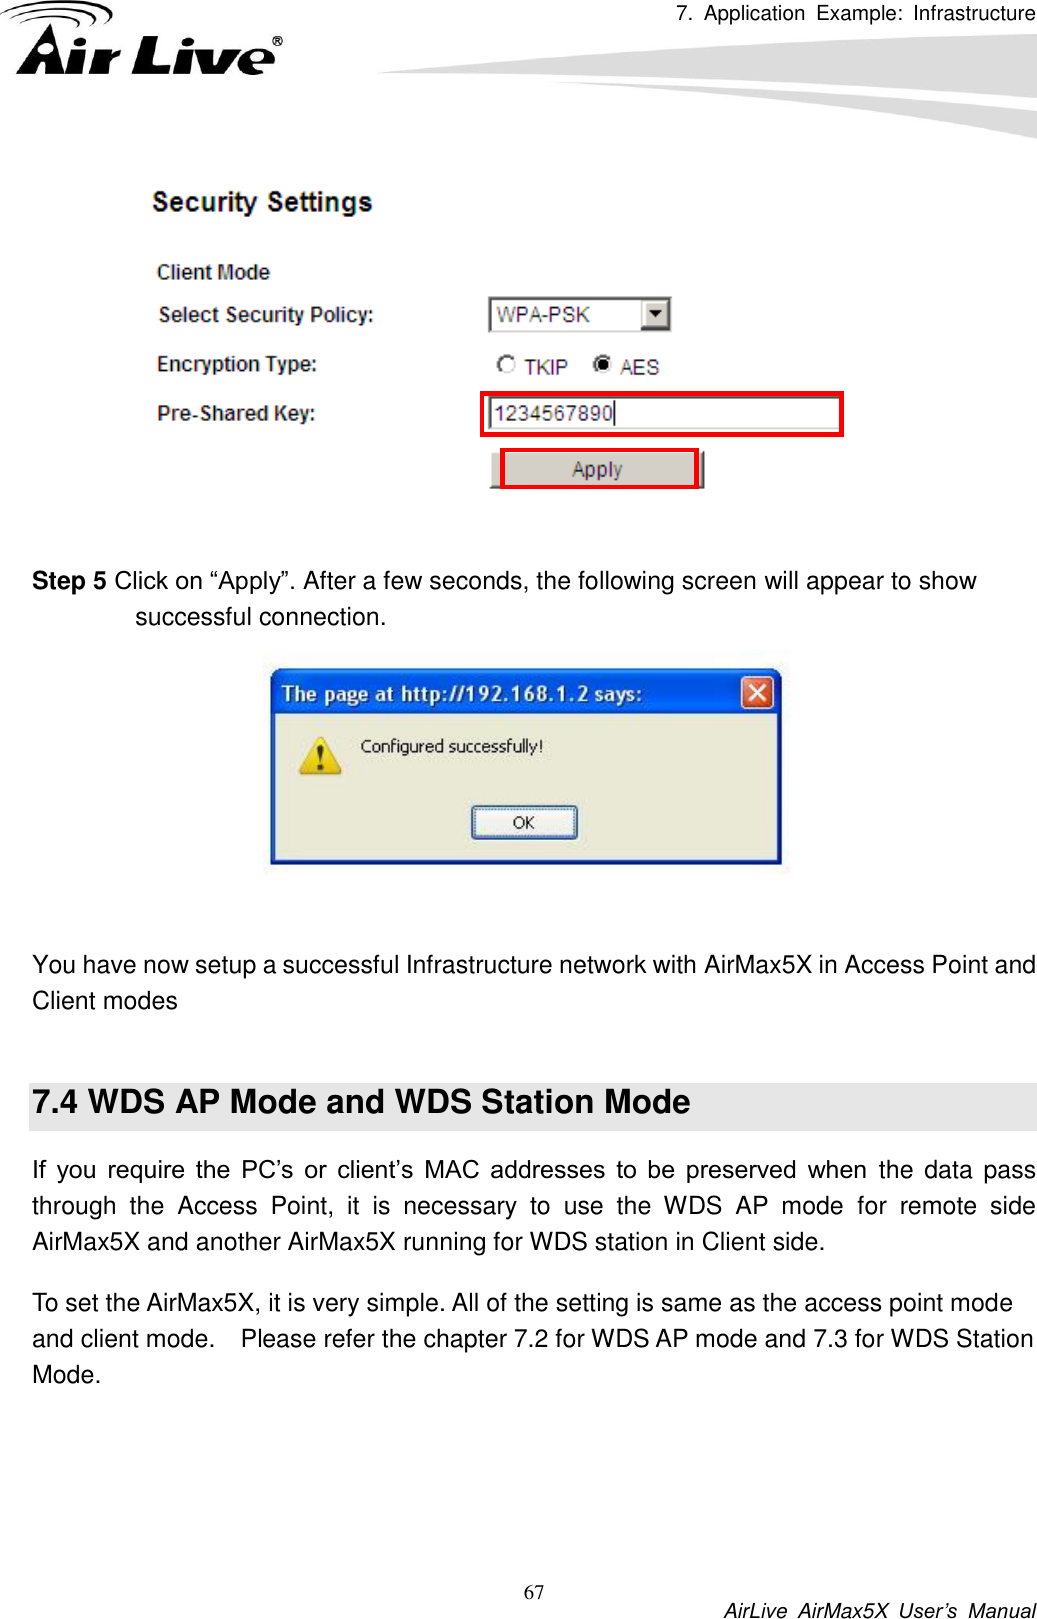 7.  Application  Example:  Infrastructure           AirLive  AirMax5X  User’s  Manual 67  Step 5 Click on “Apply”. After a few seconds, the following screen will appear to show successful connection.   You have now setup a successful Infrastructure network with AirMax5X in Access Point and Client modes  7.4 WDS AP Mode and WDS Station Mode If  you  require  the  PC’s  or  client’s  MAC  addresses  to  be  preserved  when  the  data pass through  the  Access  Point,  it  is  necessary  to  use  the  WDS  AP  mode  for  remote  side AirMax5X and another AirMax5X running for WDS station in Client side.   To set the AirMax5X, it is very simple. All of the setting is same as the access point mode and client mode.    Please refer the chapter 7.2 for WDS AP mode and 7.3 for WDS Station Mode.    